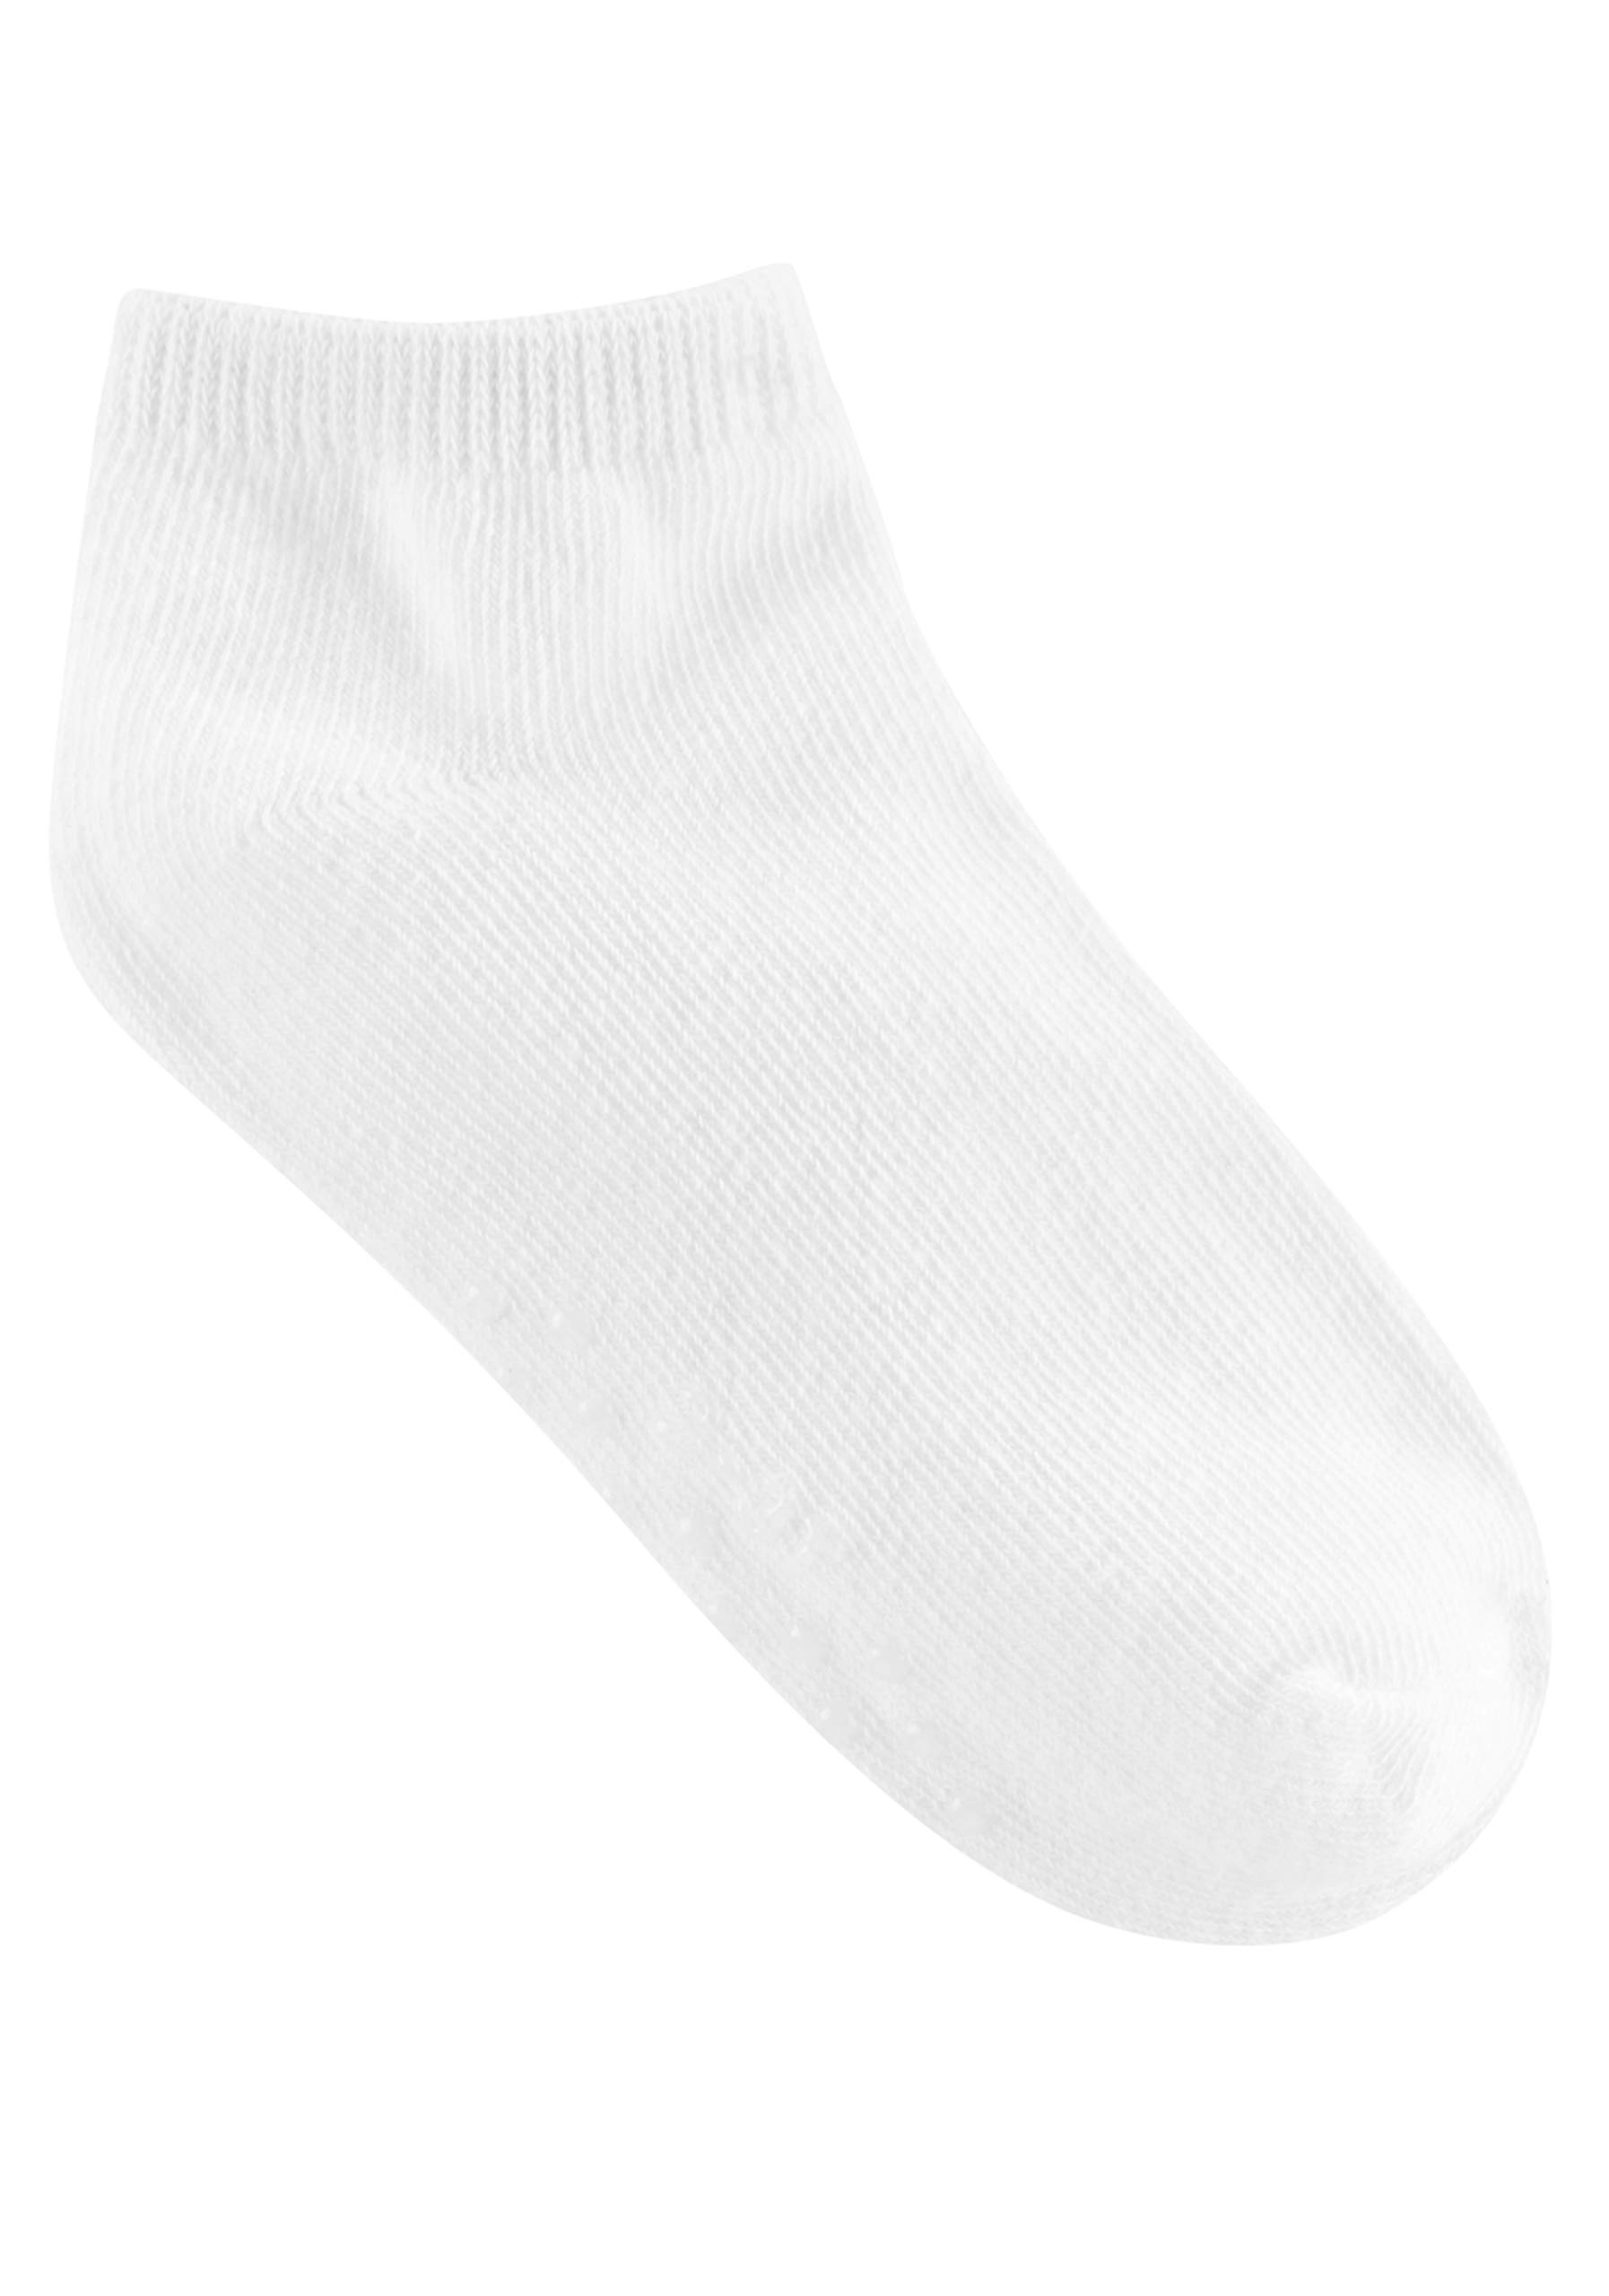 Simple Joys by Carter's Unisex Babies' No-Show Socks, 12 pairs